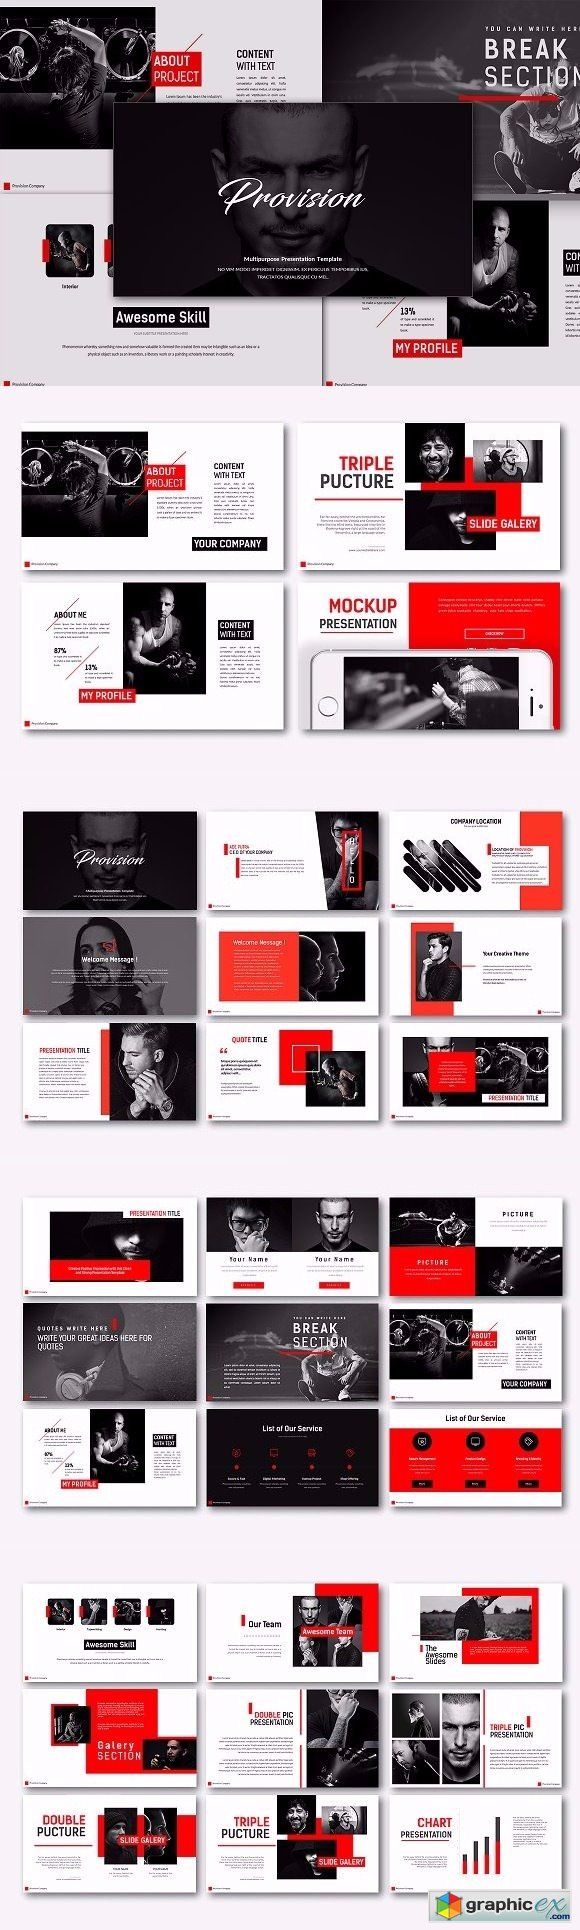 Provision Powerpoint Template